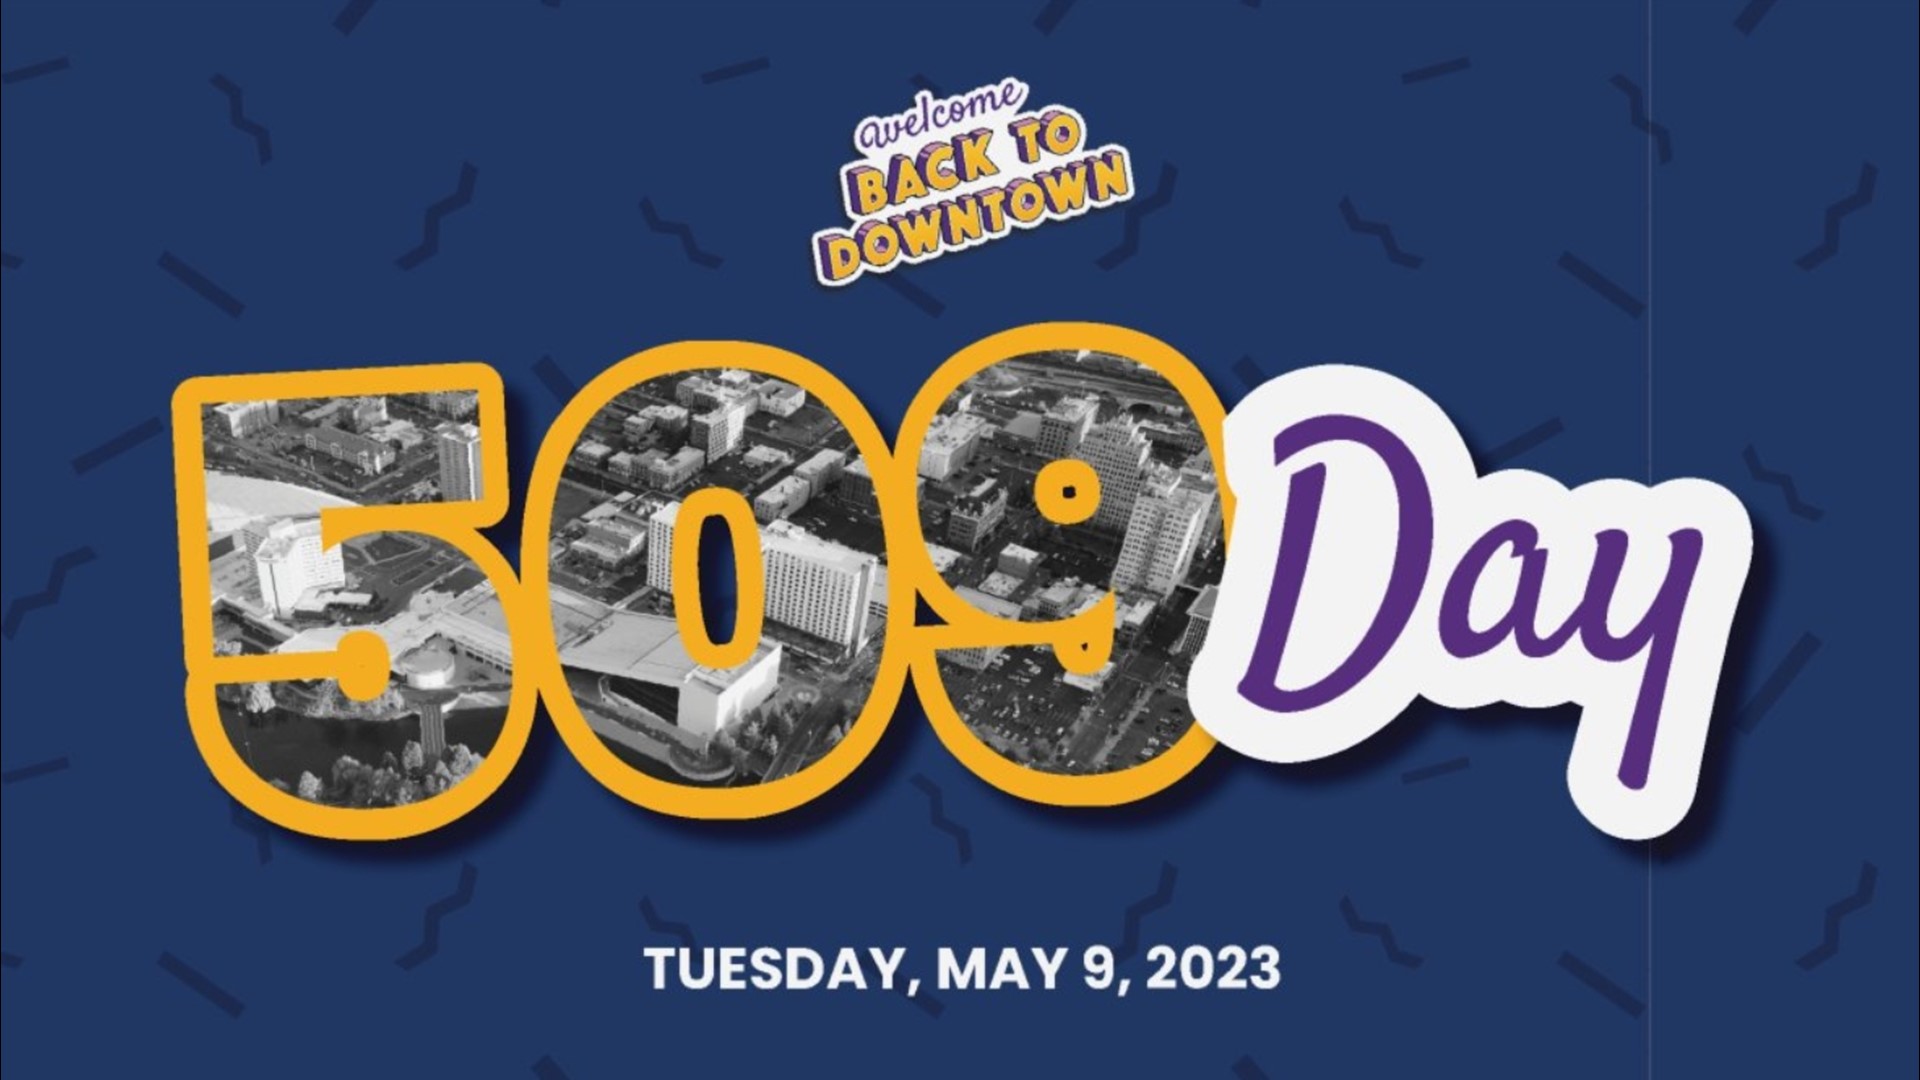 Several Spokane businesses are offering discounts or special $5.09 prices in honor of 509 day.